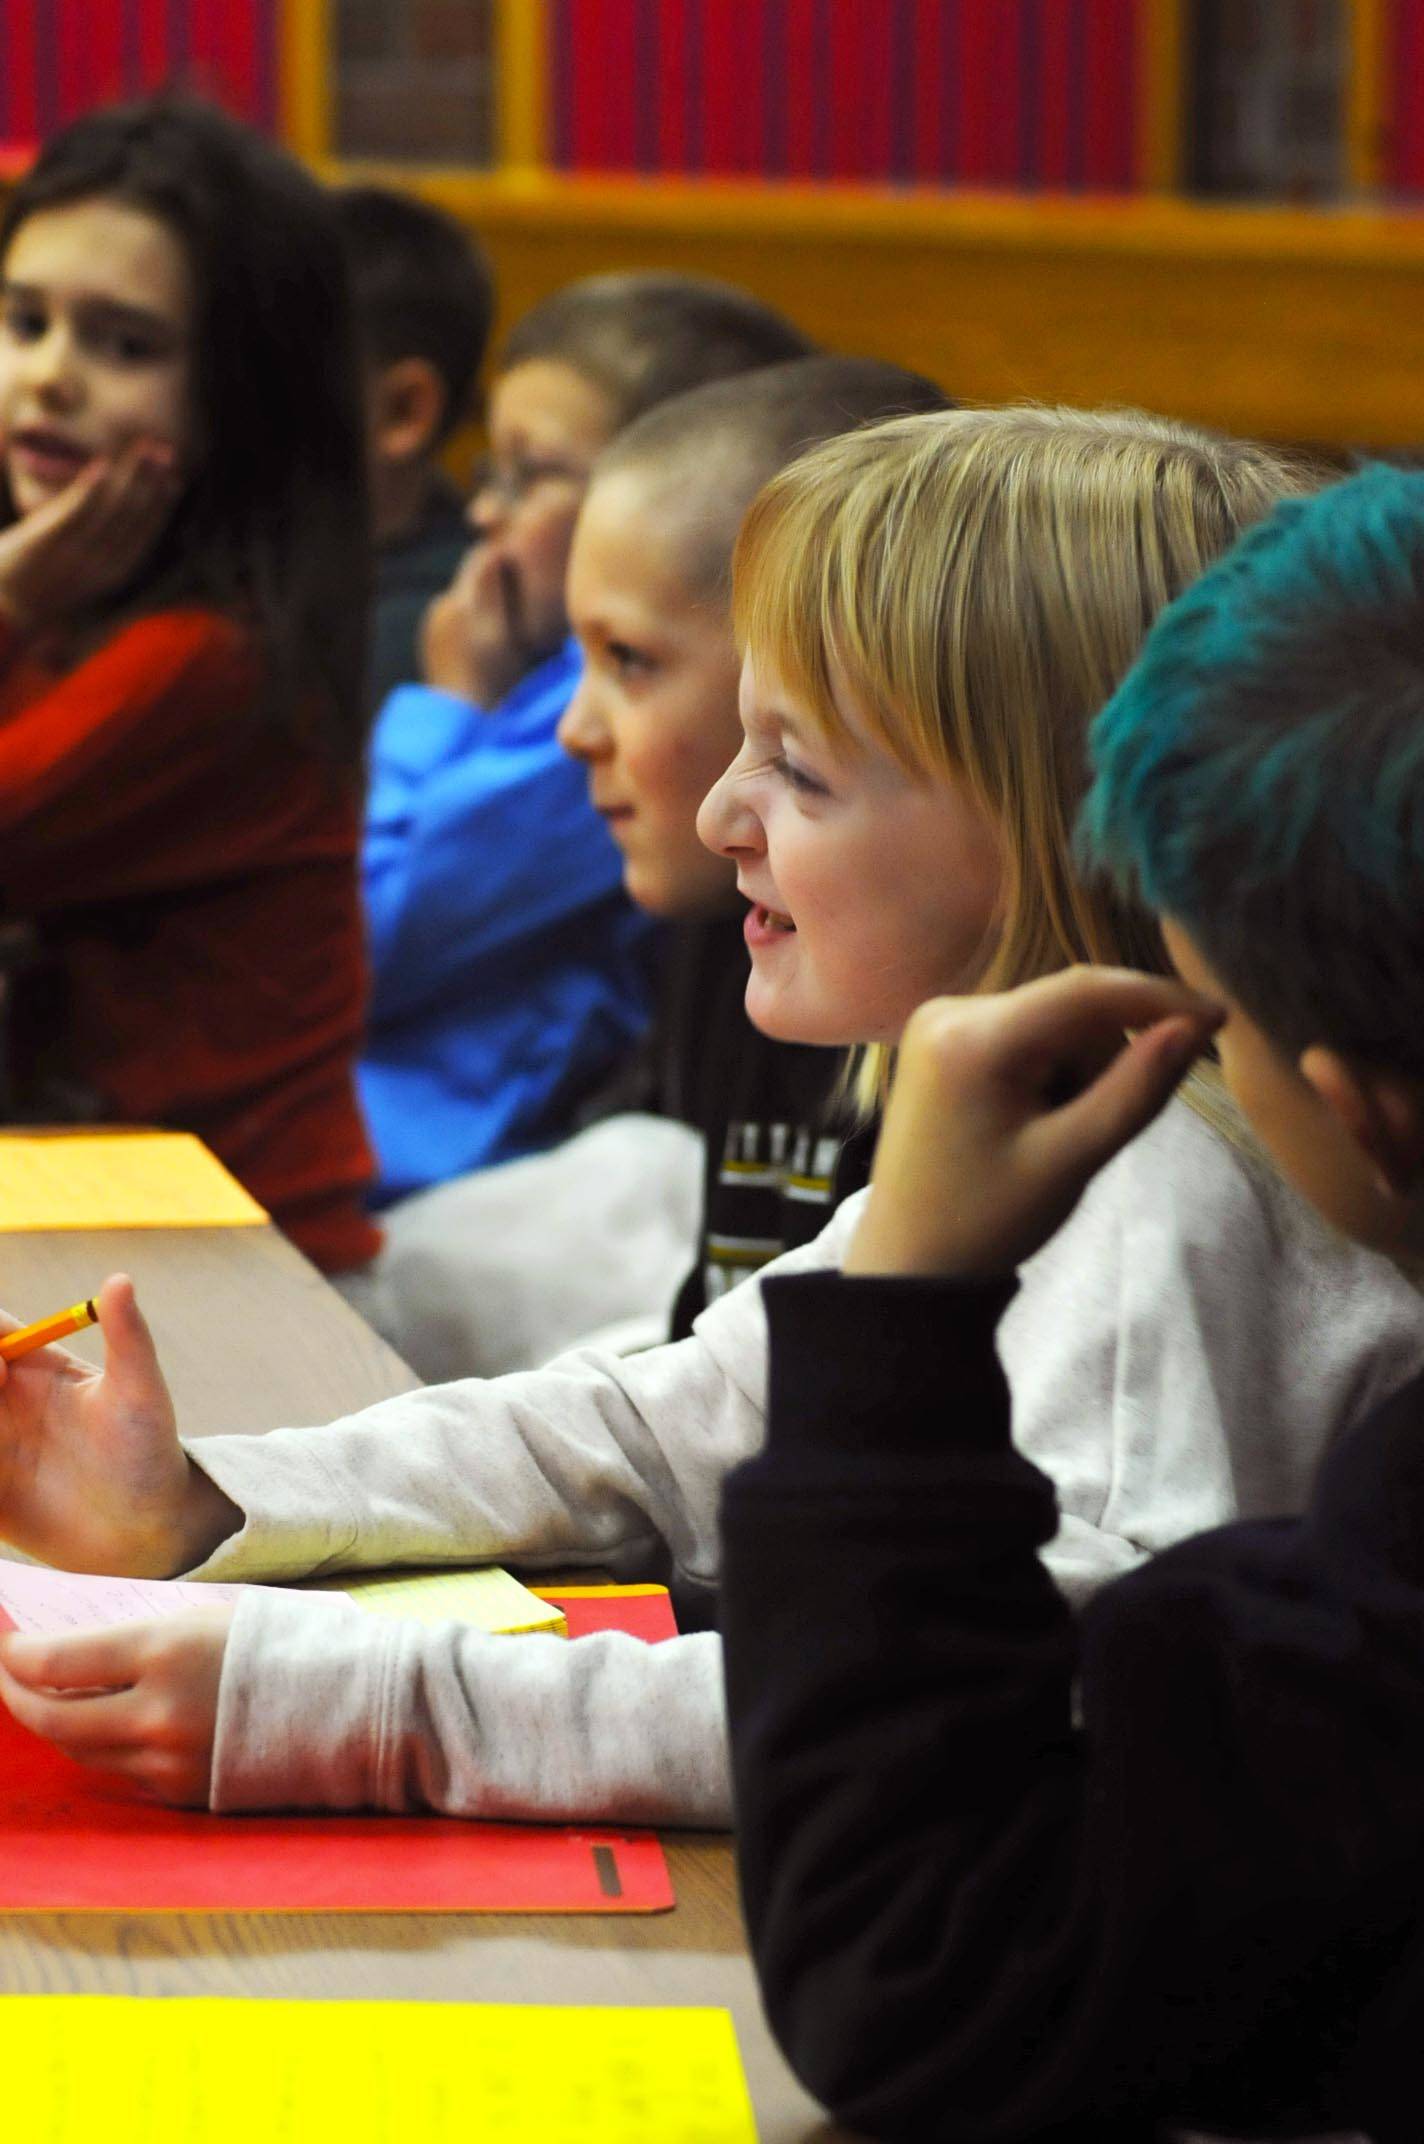 Riley Smith, a second-grader at Kalifornsky Beach Elementary School, makes a face during a witness’s statement during the class’s mock trial of “Arthur T. Grinch,” based on the Dr. Seuss classic “How the Grinch Stole Christmas” on Thursday in Kenai. The class has been studying civics and learning about the court process and put on a mock sentencing hearing, complete with witnesses and a jury composed of students’ parents and K-Beach Elementary Principal Nate Crabtree. (Photo by Elizabeth Earl/Peninsula Clarion)